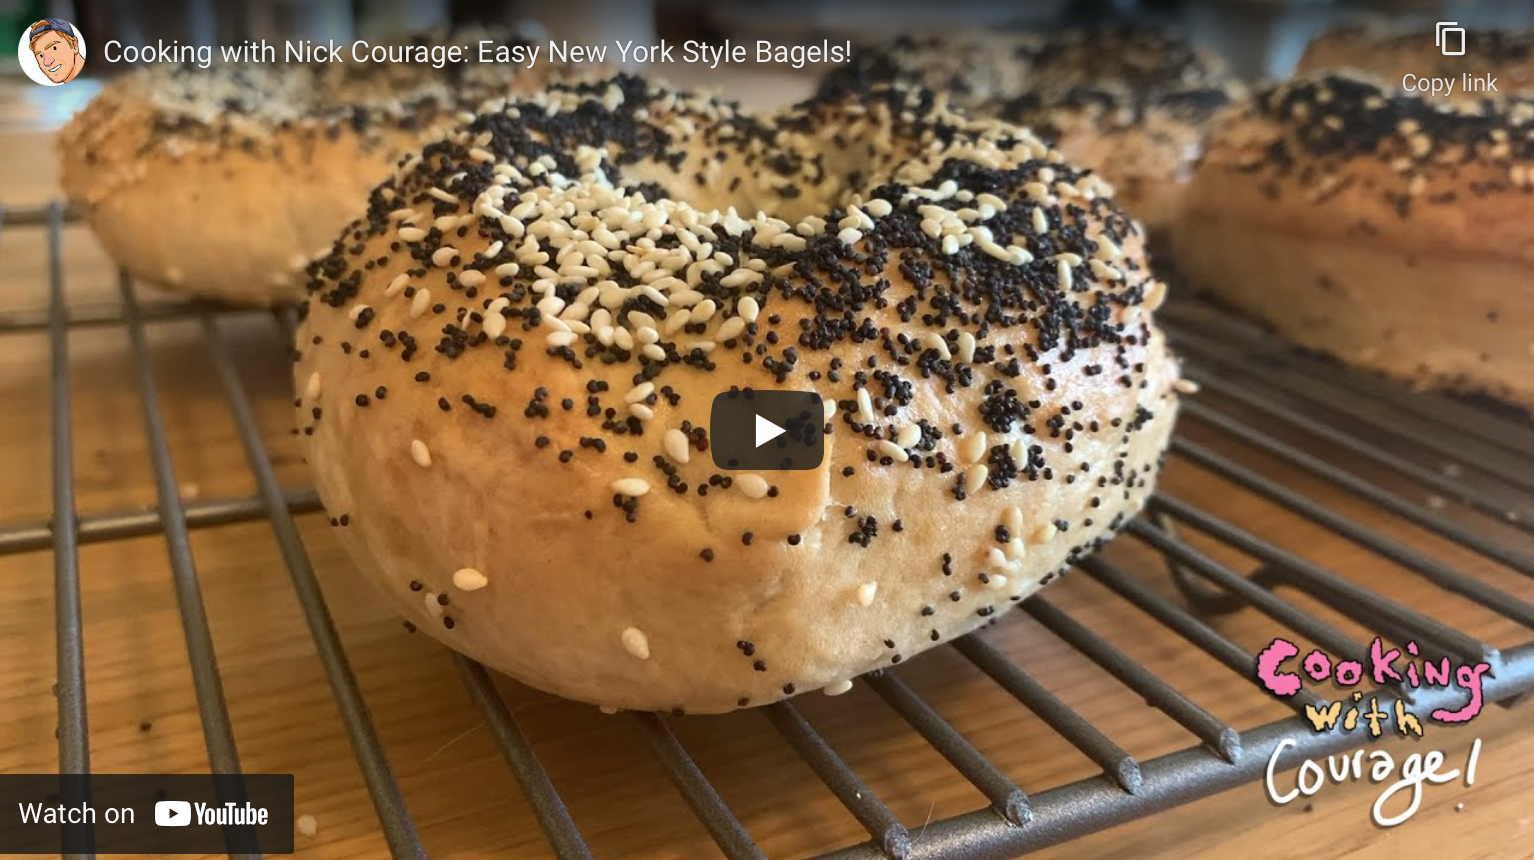 Cooking with Nick Courage: Easy, New York Style Bagels!